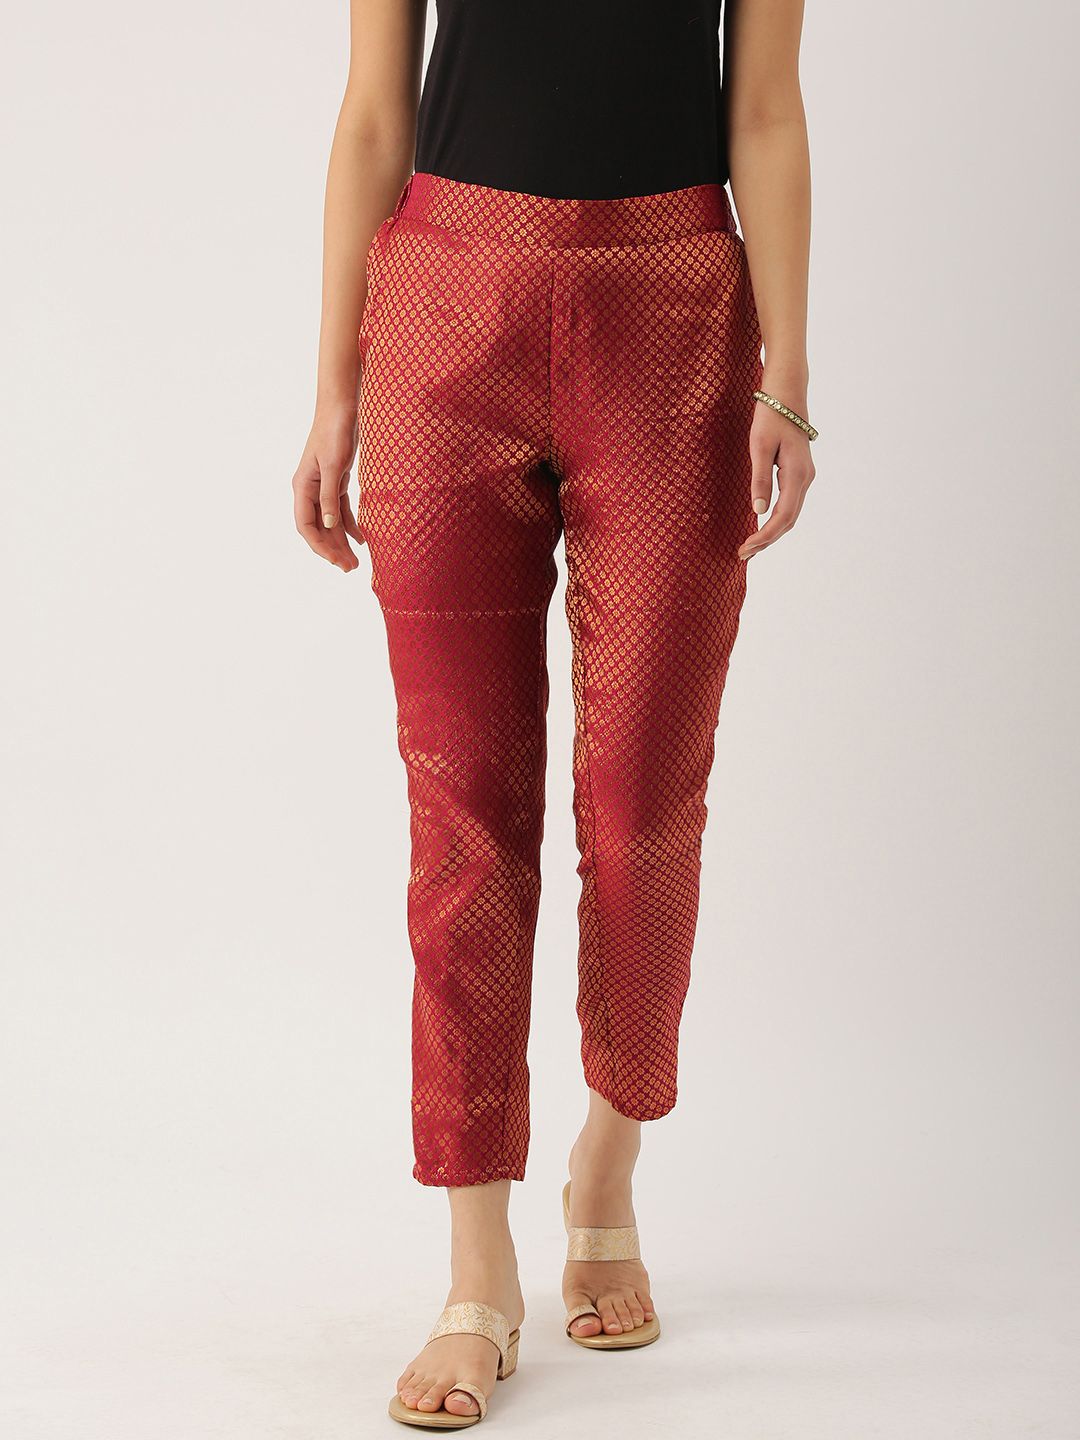 IMARA Women Maroon & Gold-Toned Regular Fit Woven Design Cropped Cigarette Trousers Price in India